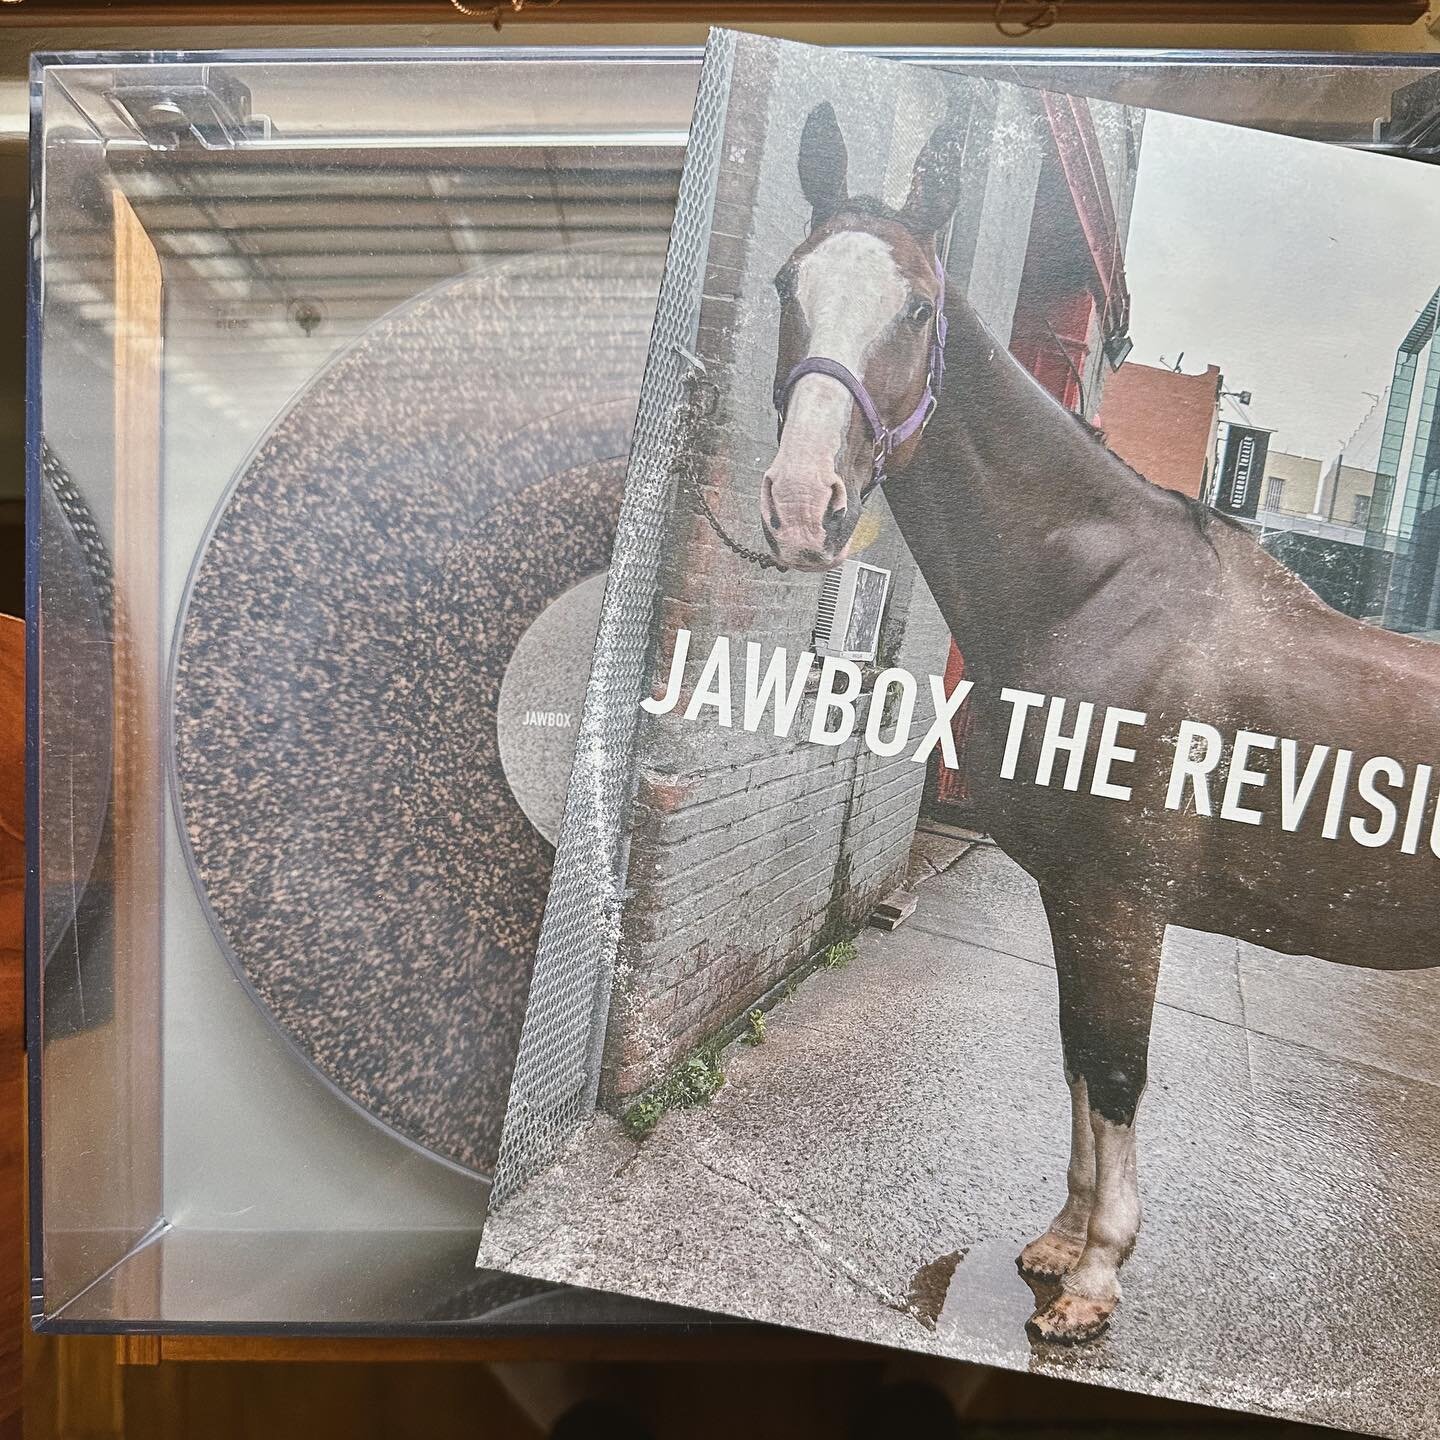 Pretty wild that in 2023, one of the all-time greats has a new release on vinyl. The Wire cover is worth the price of admission, alone. Here&rsquo;s hoping @jawboxofficial has more new music up their sleeves. (Cc: @arcticrodeo)